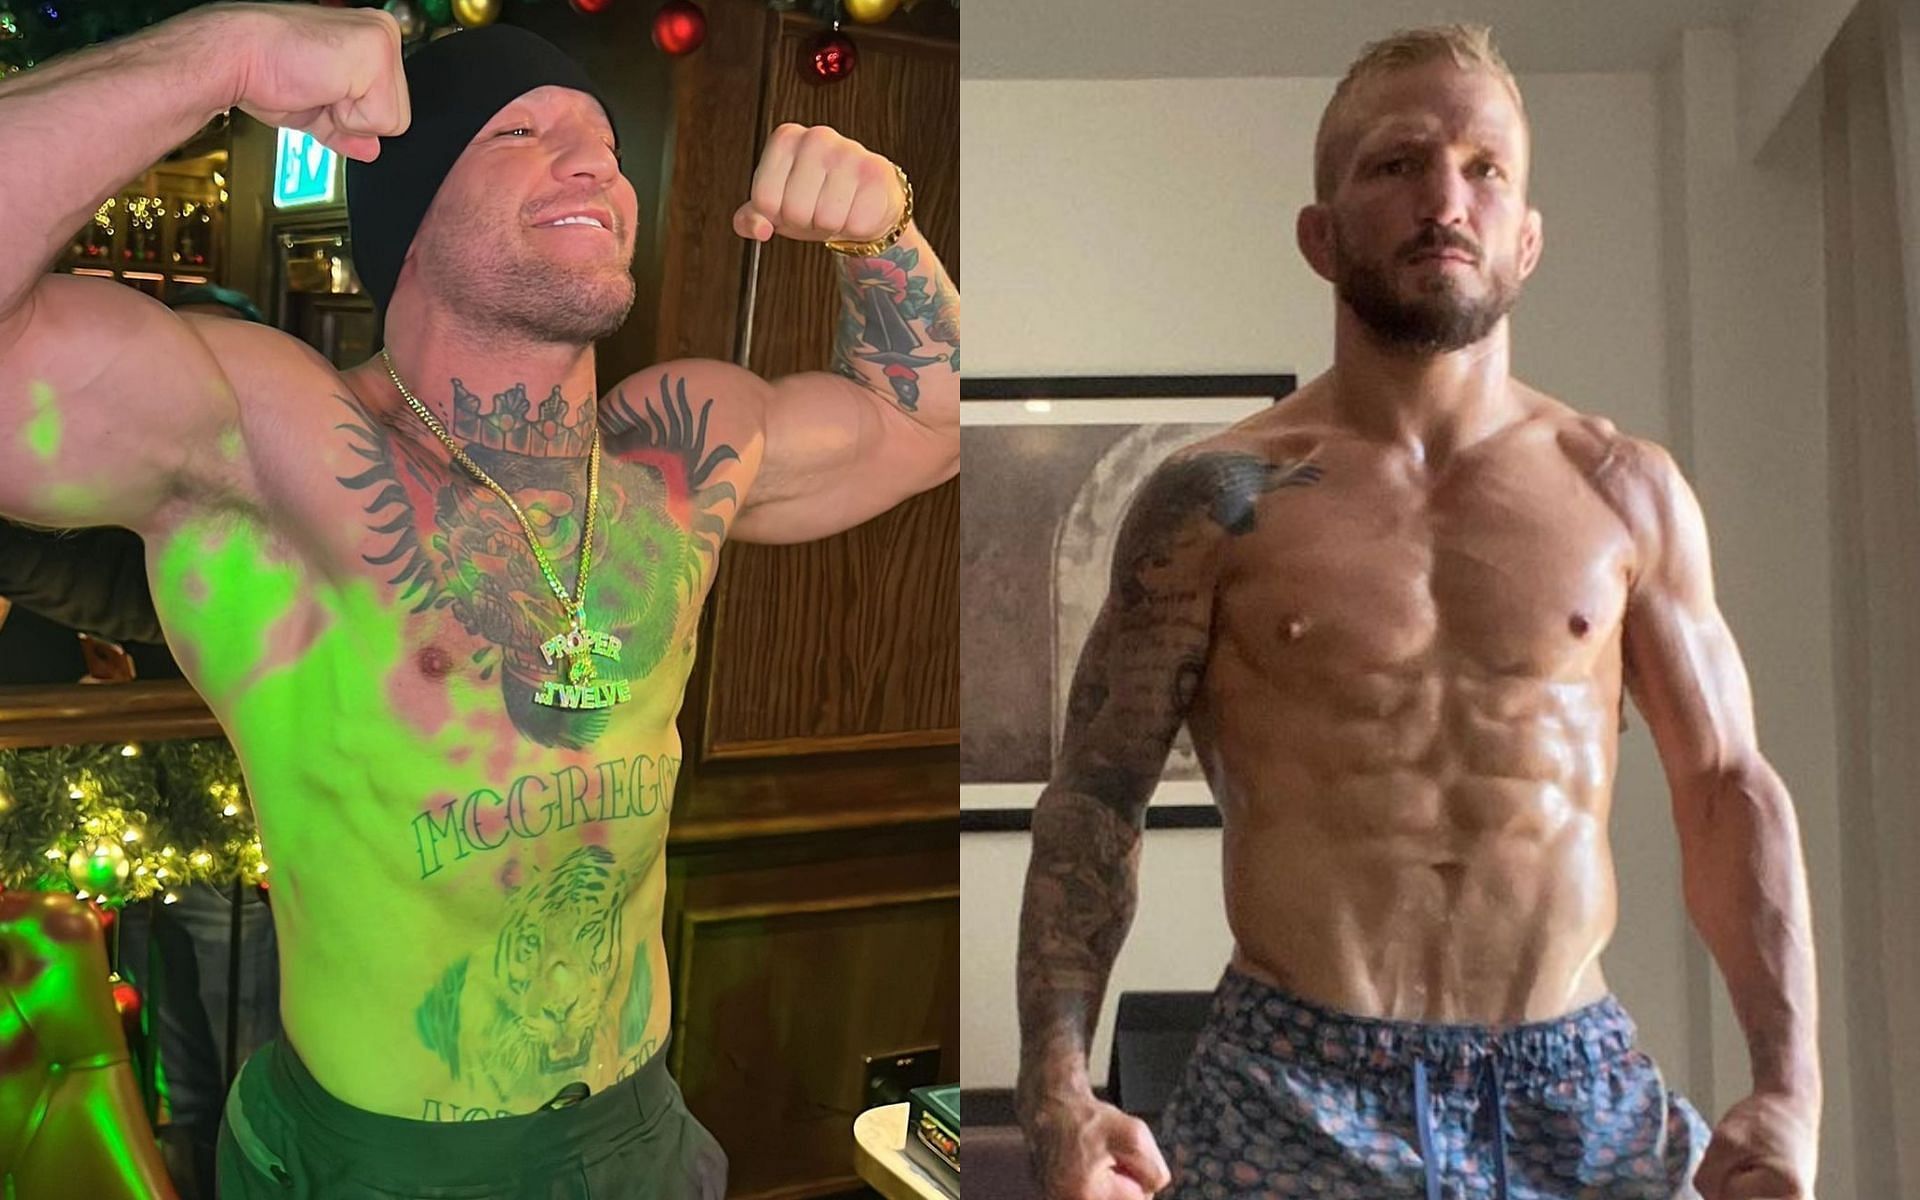 Conor McGregor (Left), T.J.Dillashaw (Right) [Image courtesy: @thenotoriousmma and @tjdillashaw on Instagram]